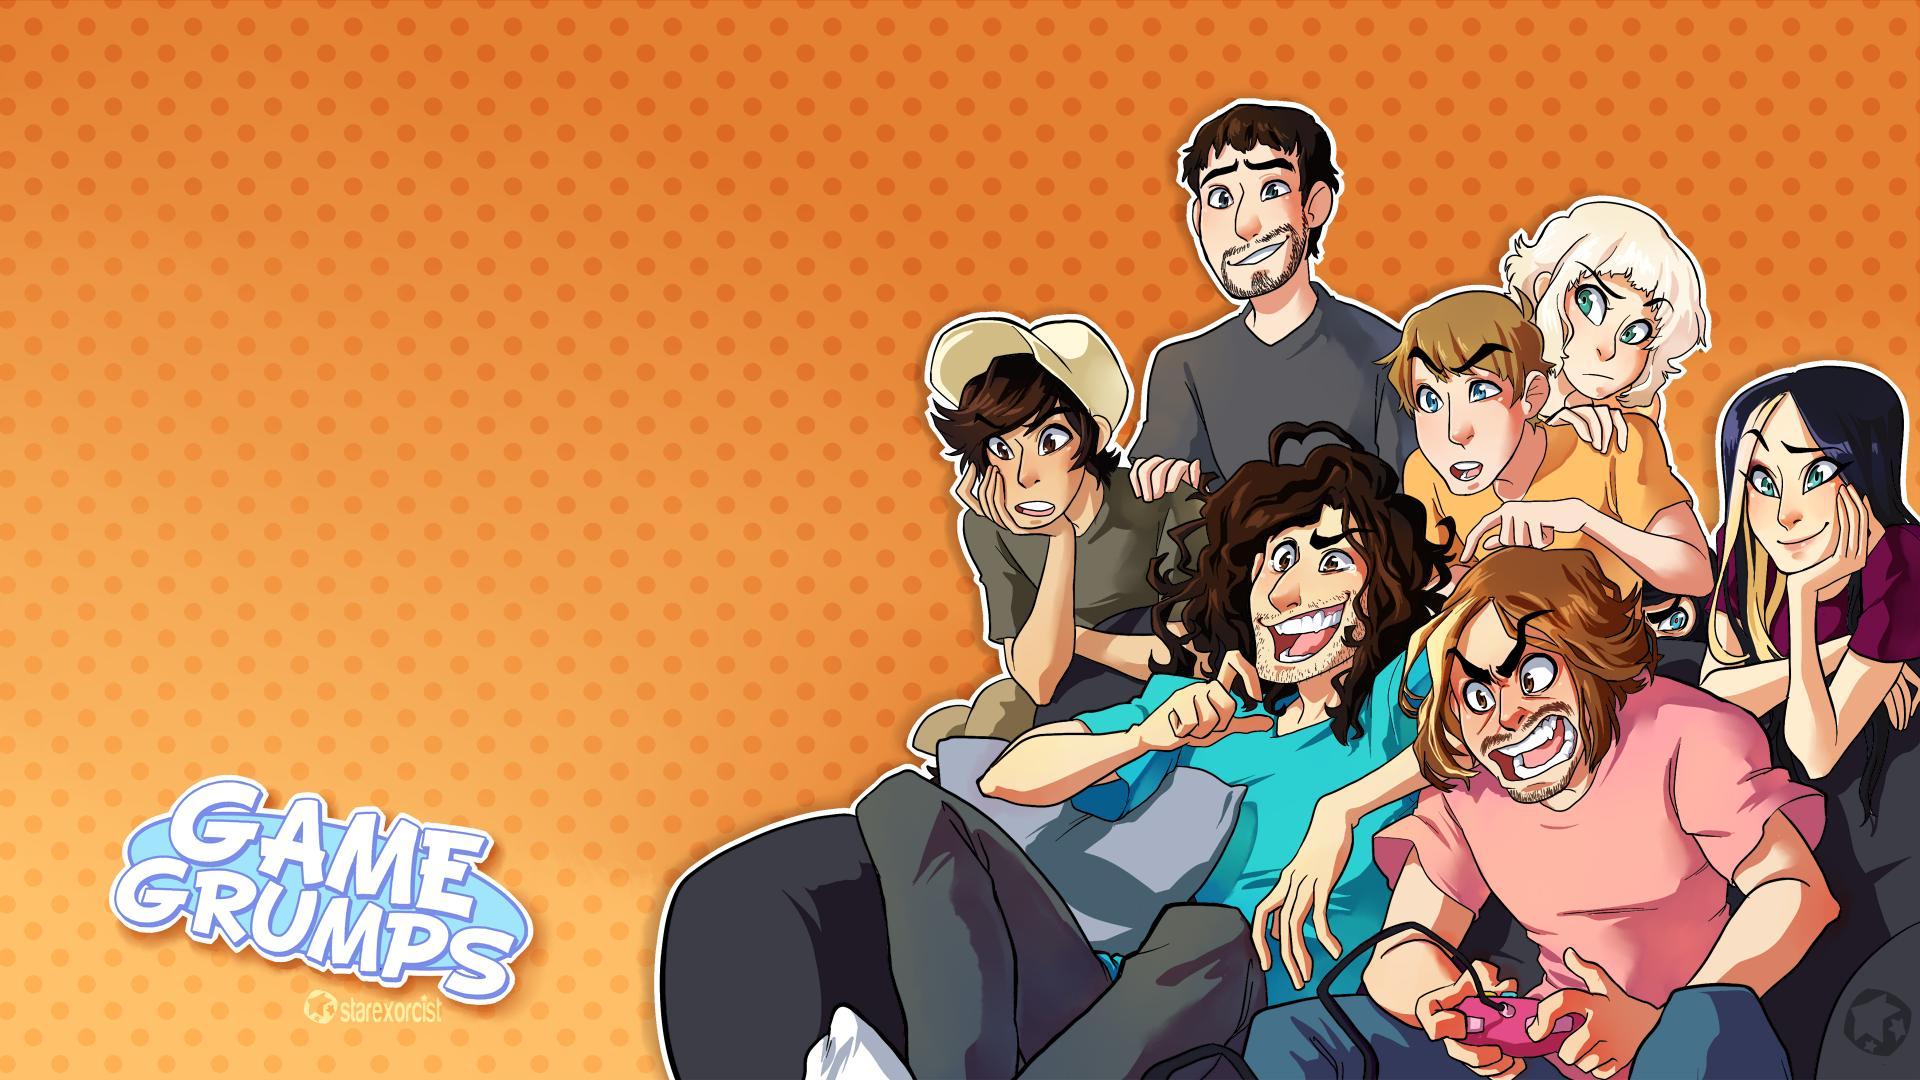 GameGrumps Wallpaper because I apparently have too much time on my